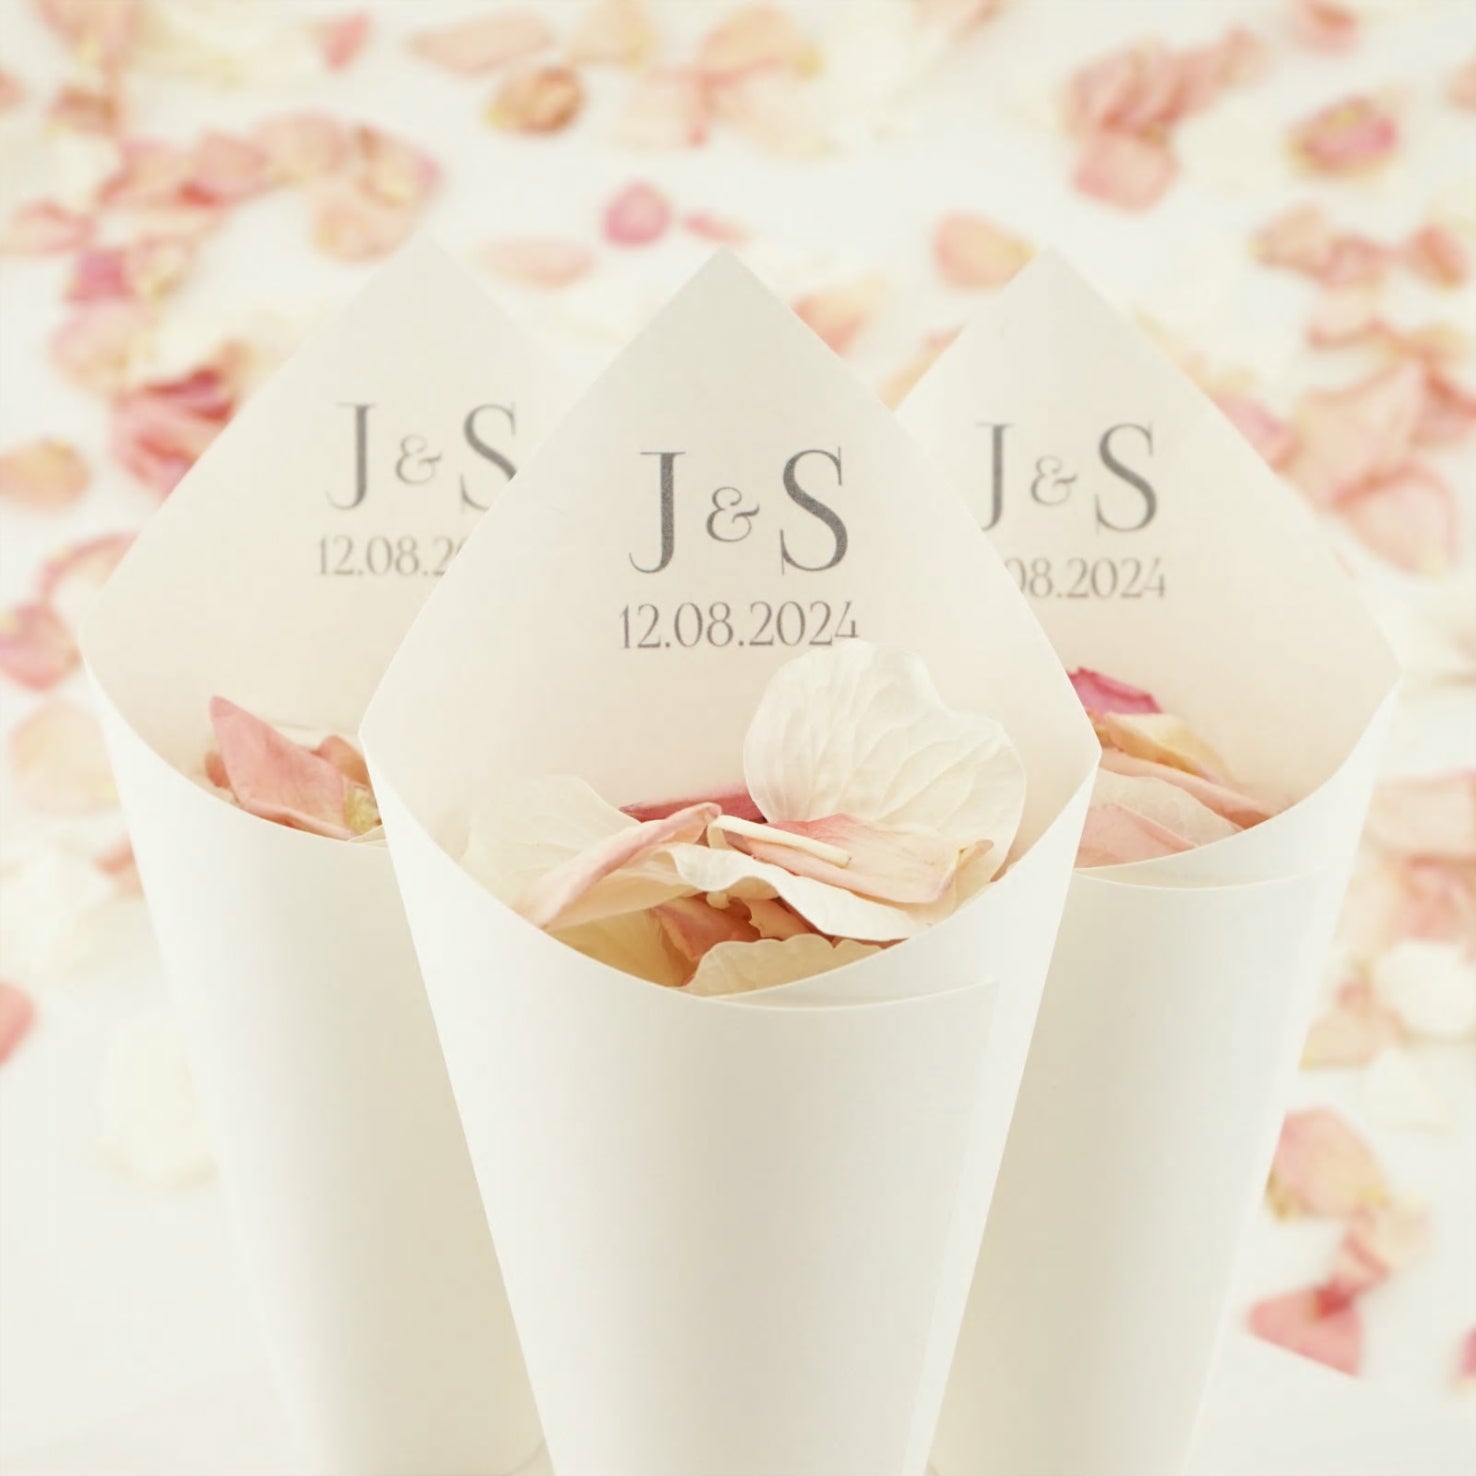 Aoqing Confetti Dried Flowers and Petals - 100% Natural Wedding Confetti Dried Flower Petals Pop Wedding and Party Decoration Biodegradable Rose Petal